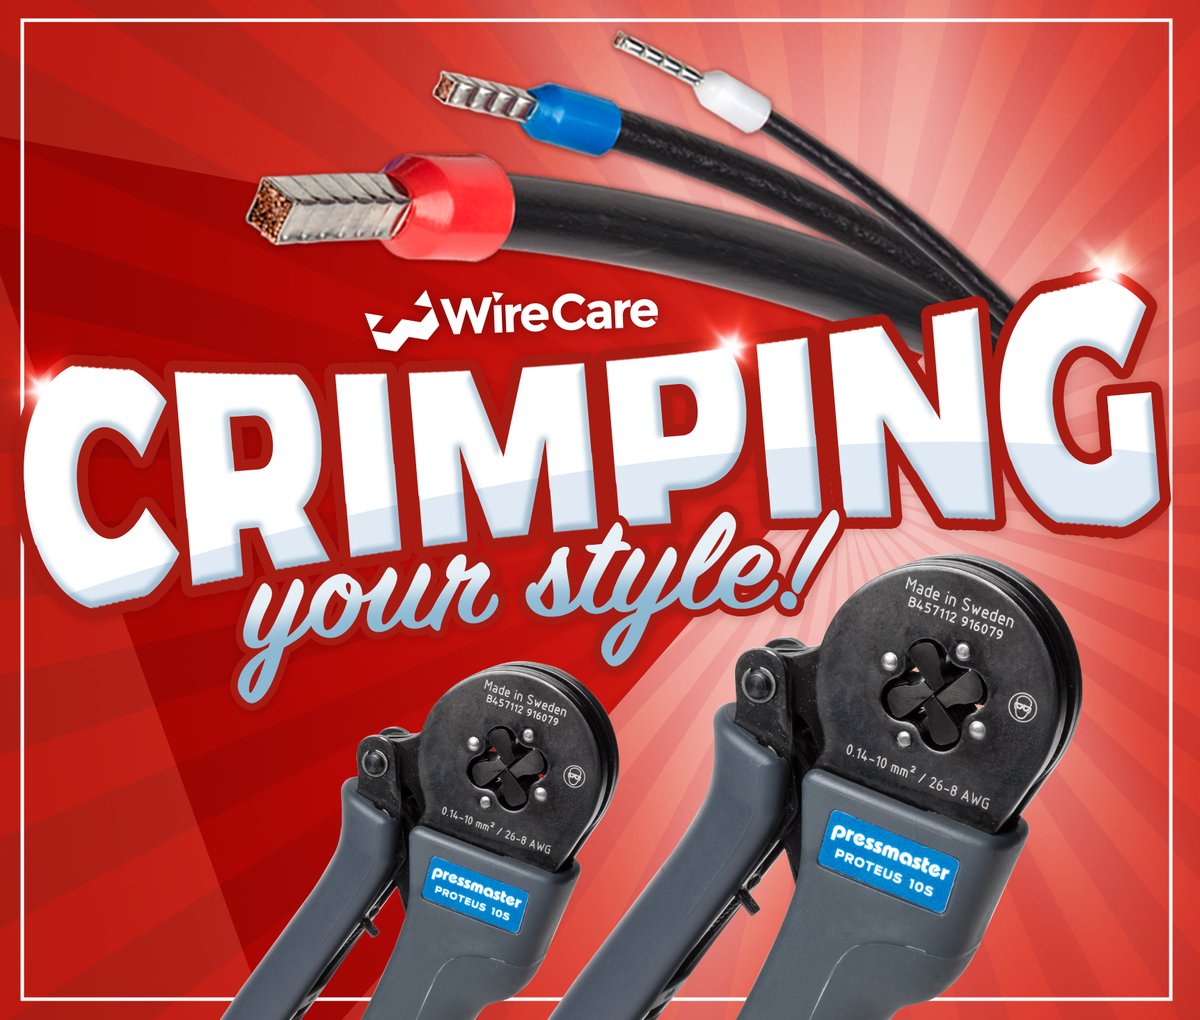 Crimping is a crucial step in making strong and reliable wire connections. Shop at WireCare® for crimpers, die sets, crimping kits and more to finish nearly any crimping application. #WireCare #WireCrimping #WireCrimper #WireStripper #Wiring #Tools #HandTools